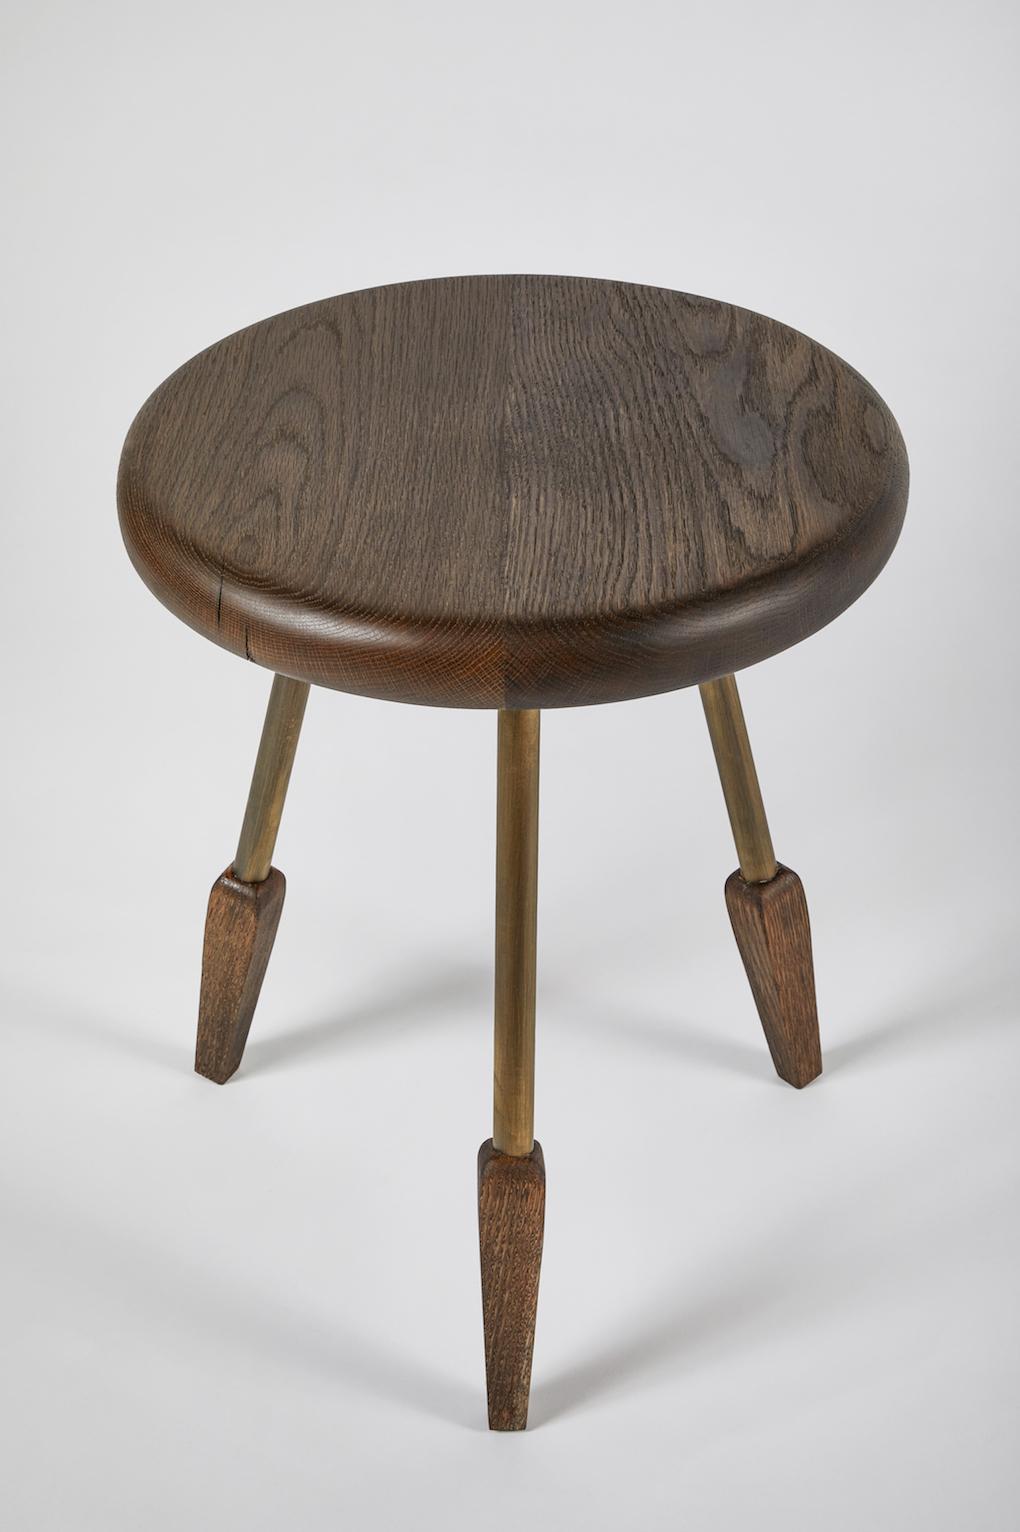 Milking stool with rounded edge and polished solid brass legs. Made in the USA by Casey McCafferty.


Available finishes:
Oiled black walnut, oiled white oak, bleached white oak, charred ash, oxidized maple

Customisation is available. Charges